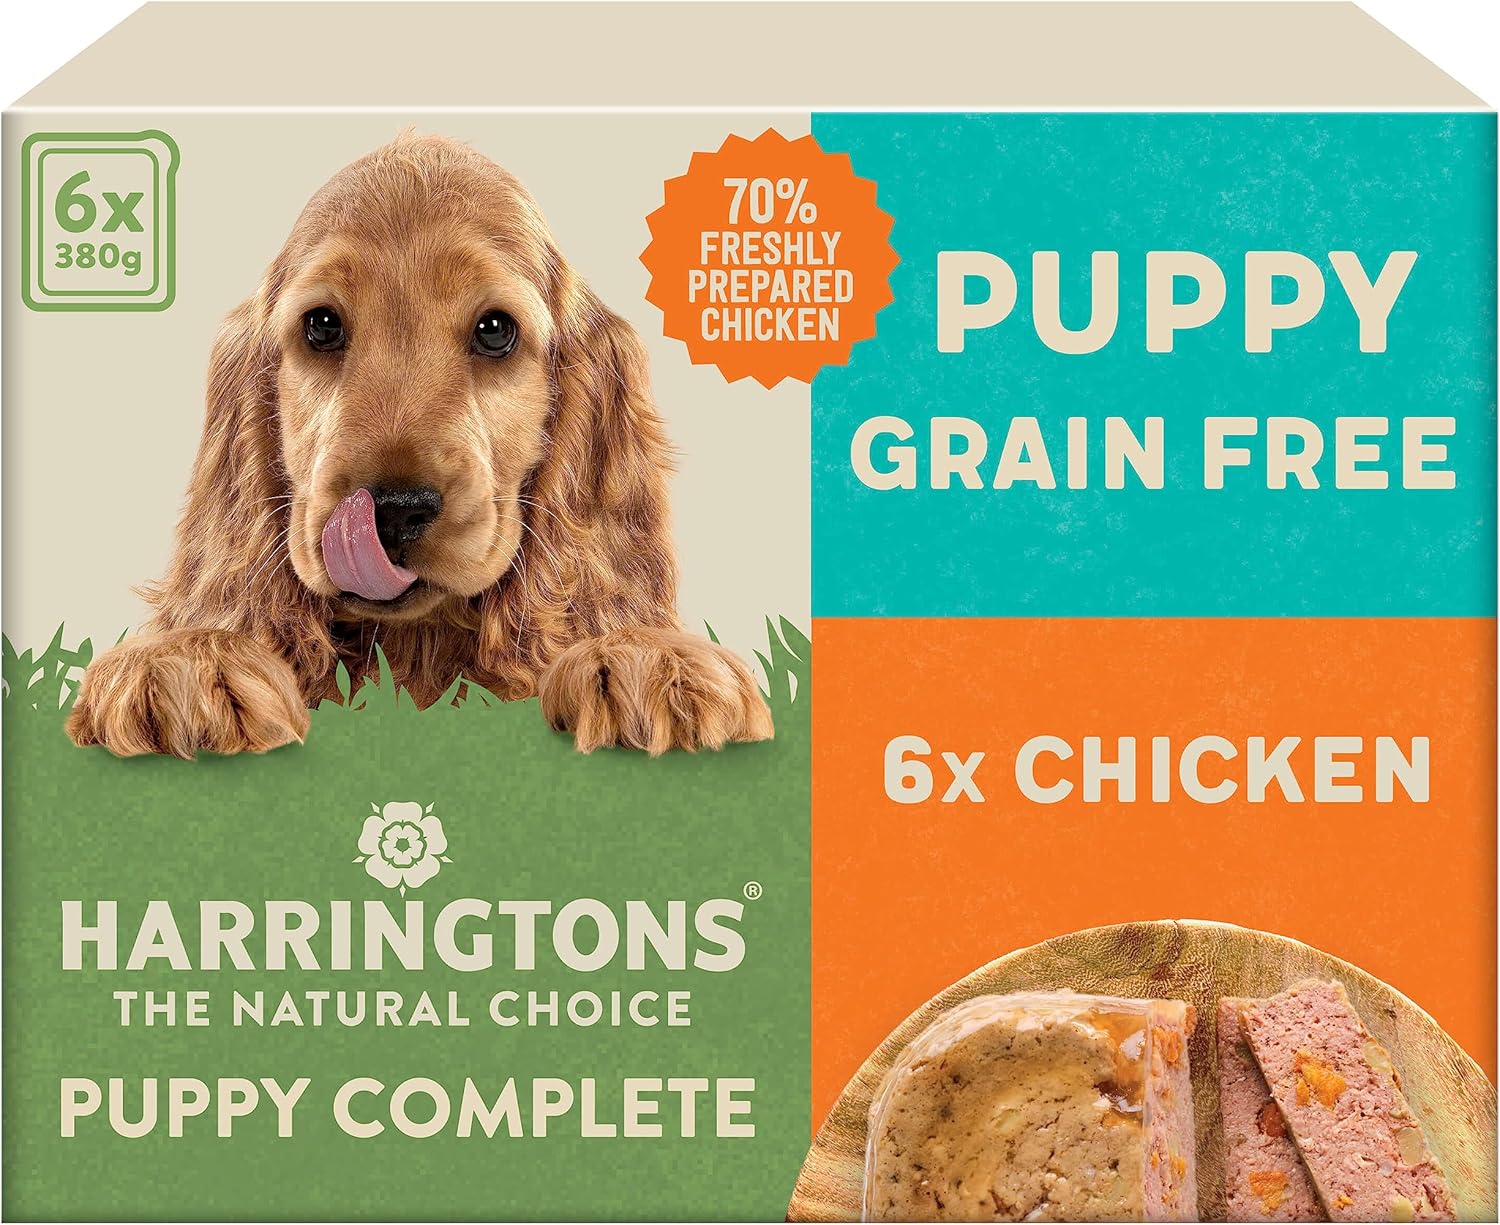 Harringtons Complete Wet Tray Grain Free Hypoallergenic Puppy Food 6x380g - Chicken & Potato- Made with All Natural Ingredients?HARRWP6-C380